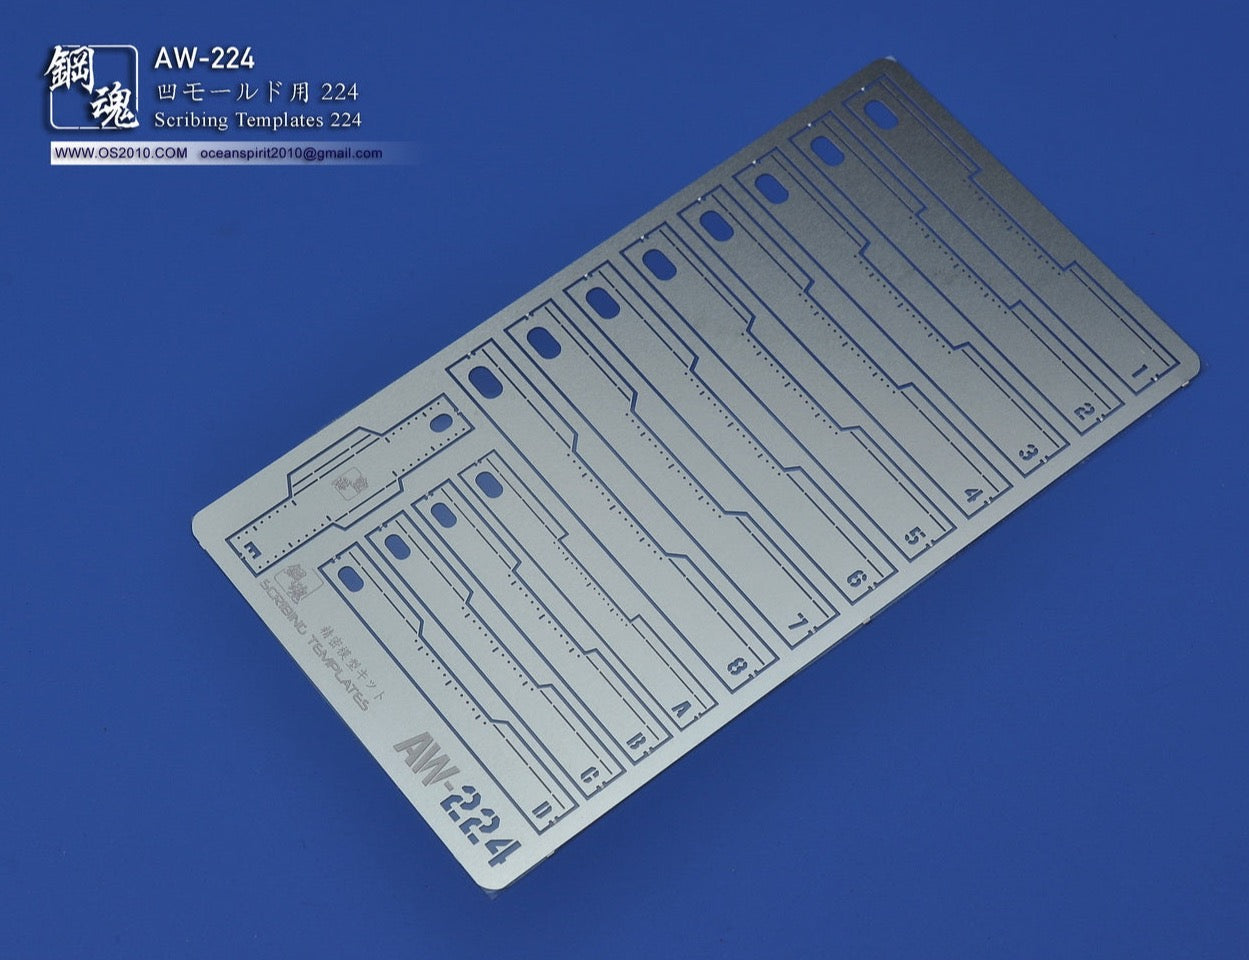 Madworks AW-224 Scribing Template - Newtype